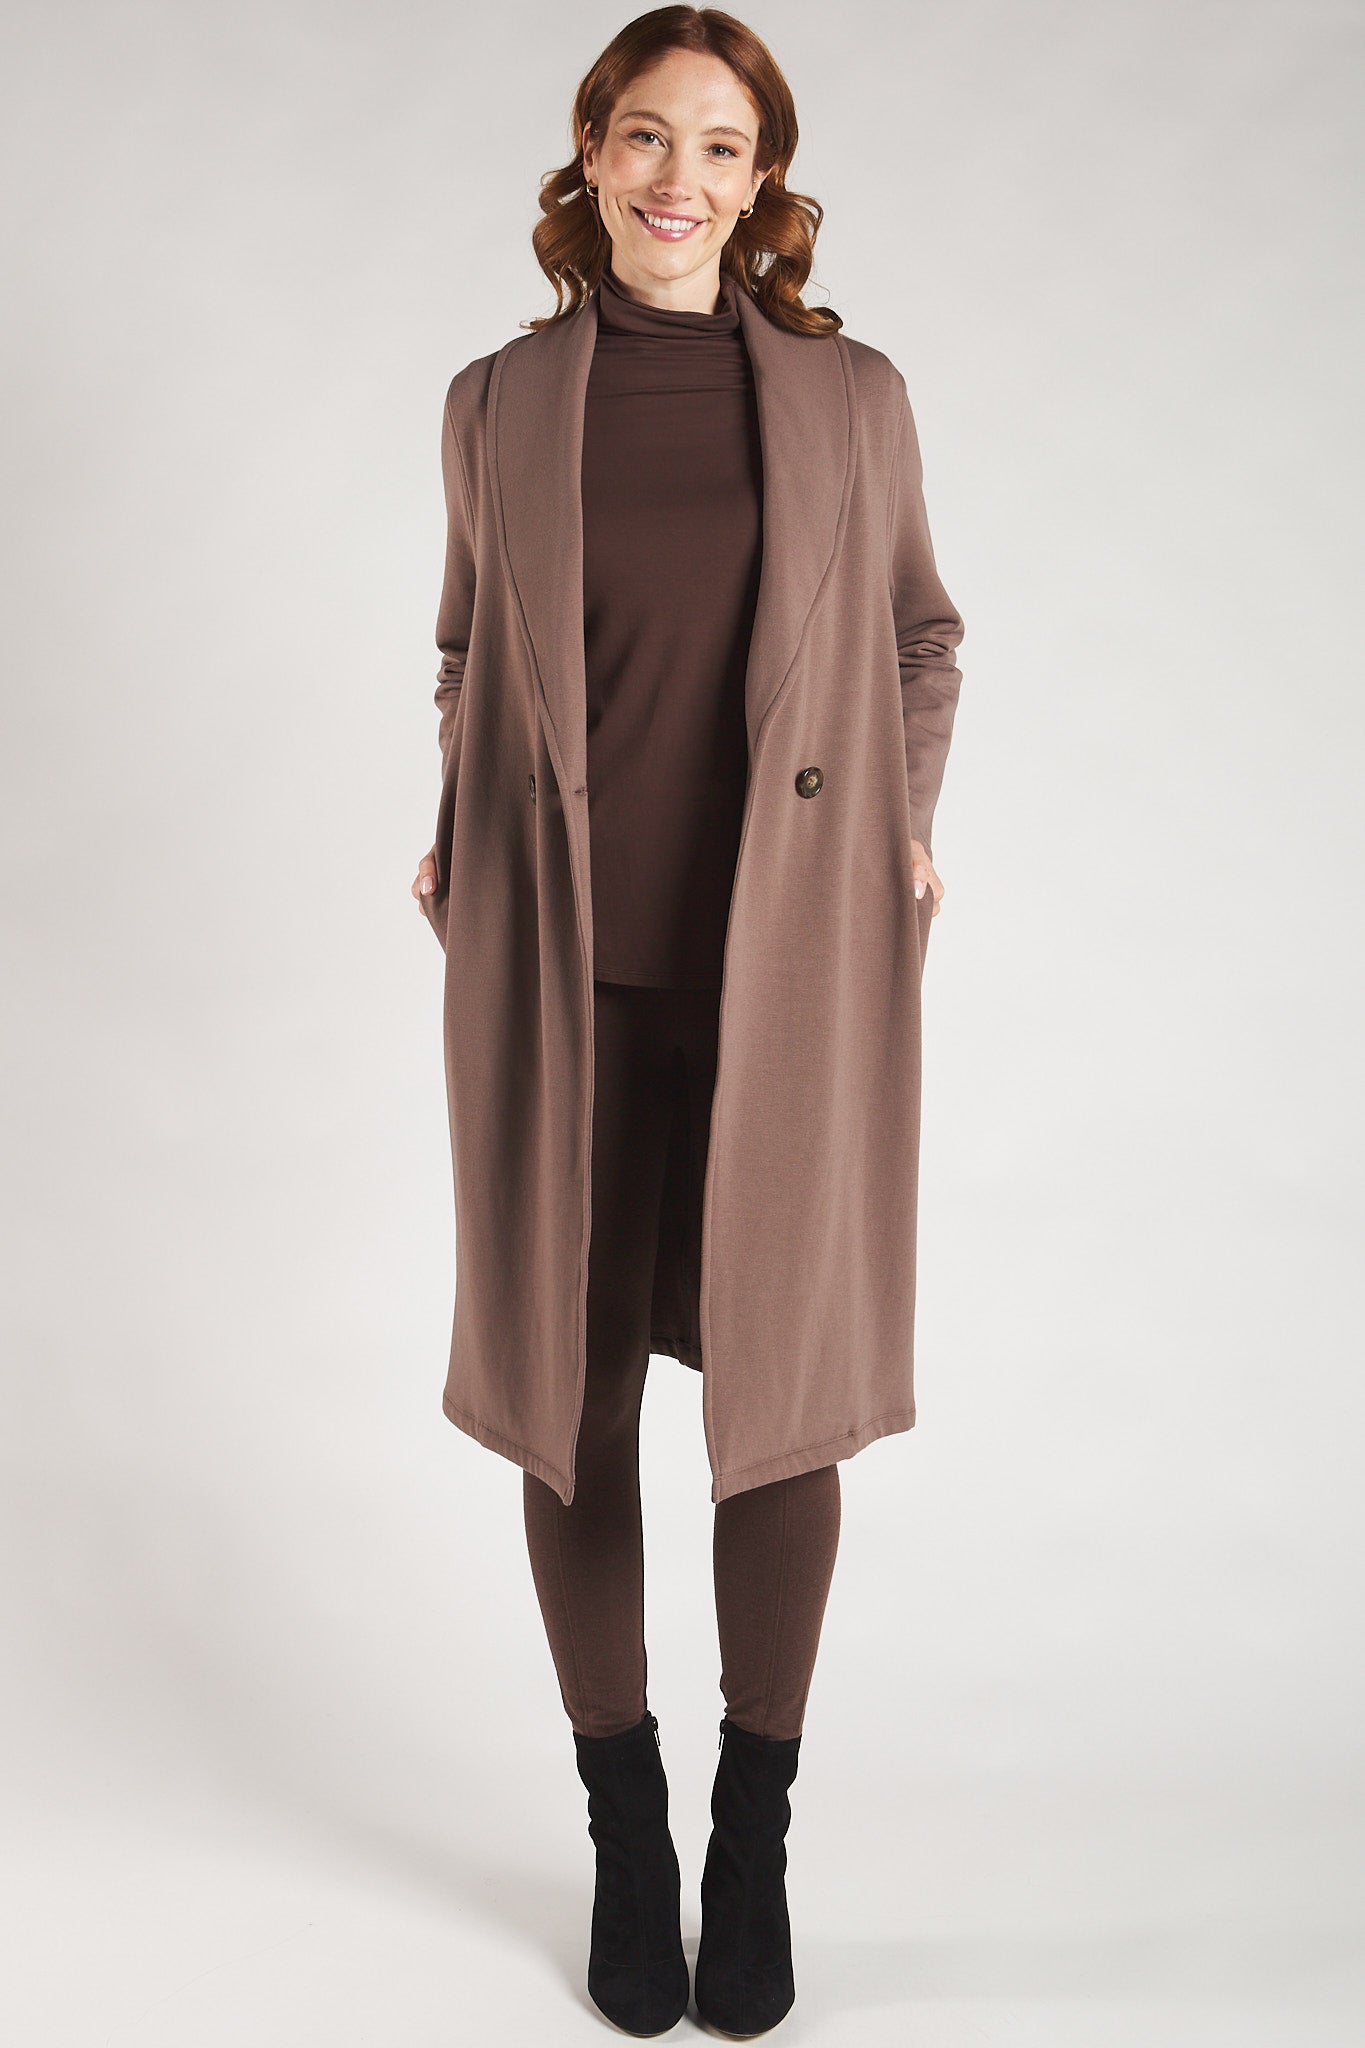 Woman styling a brown long sleeve turtleneck top with a brown jacket from Terrera.